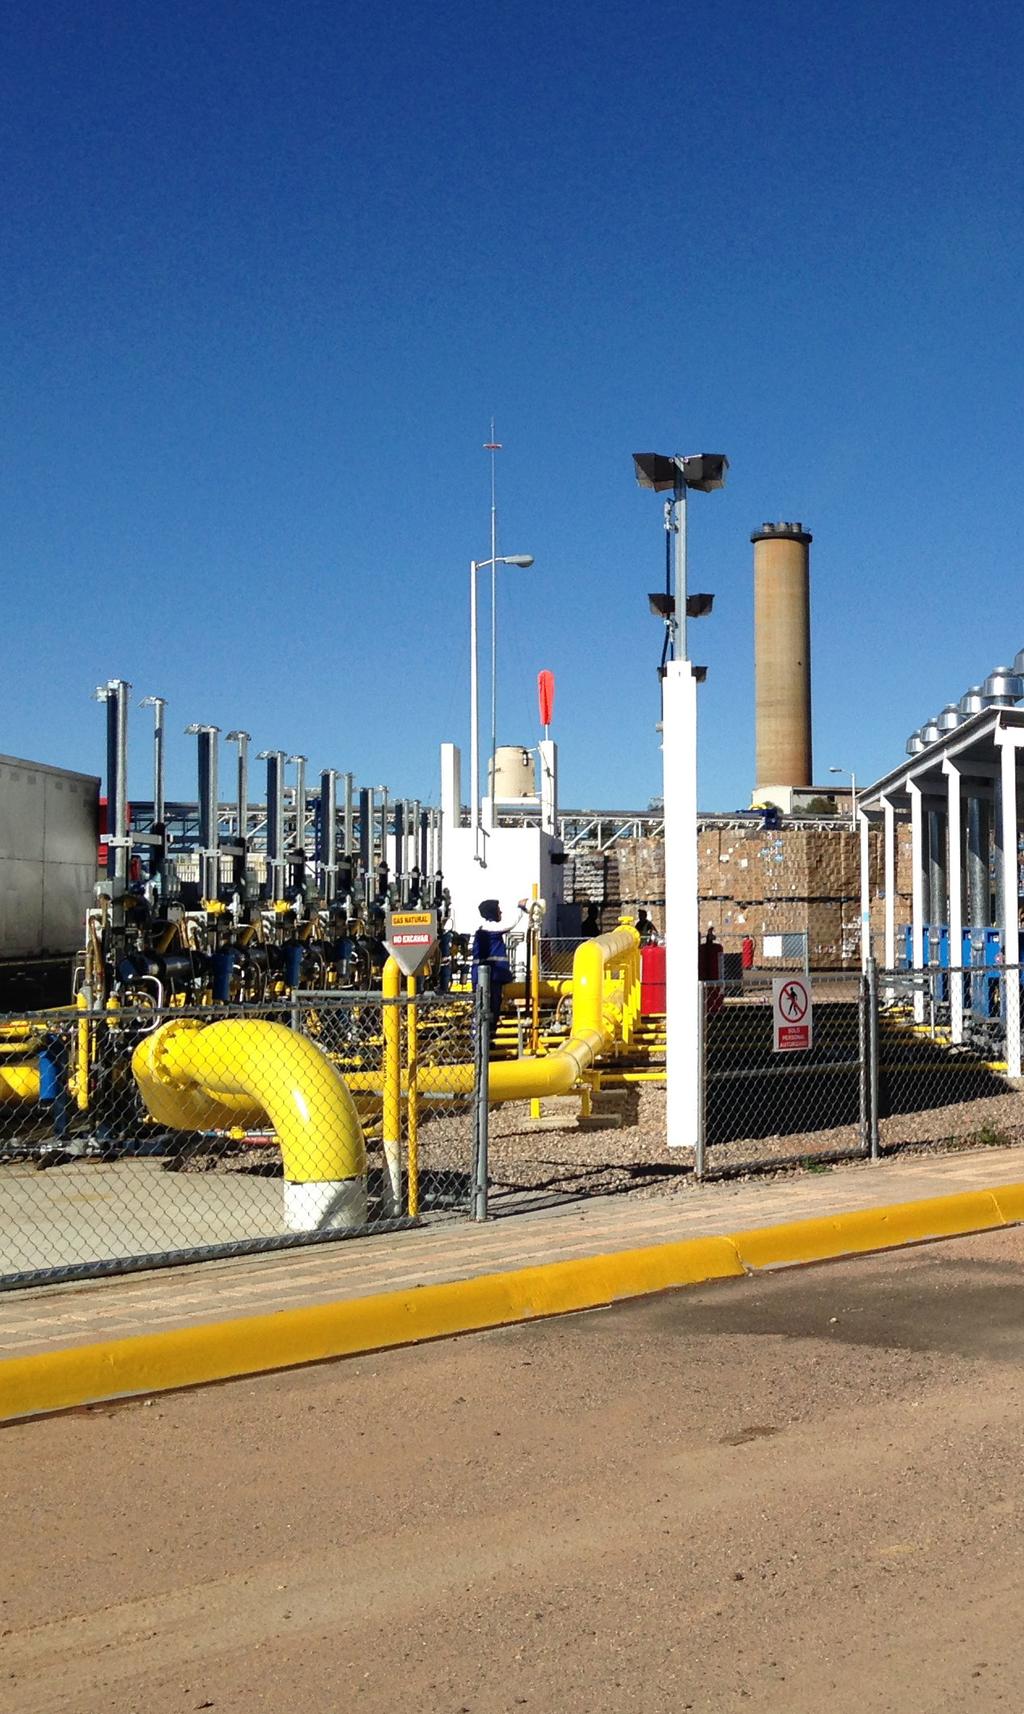 FEATURE PROJECTS Projects Expanded CNG-Based Vehicle Fueling Station Network.